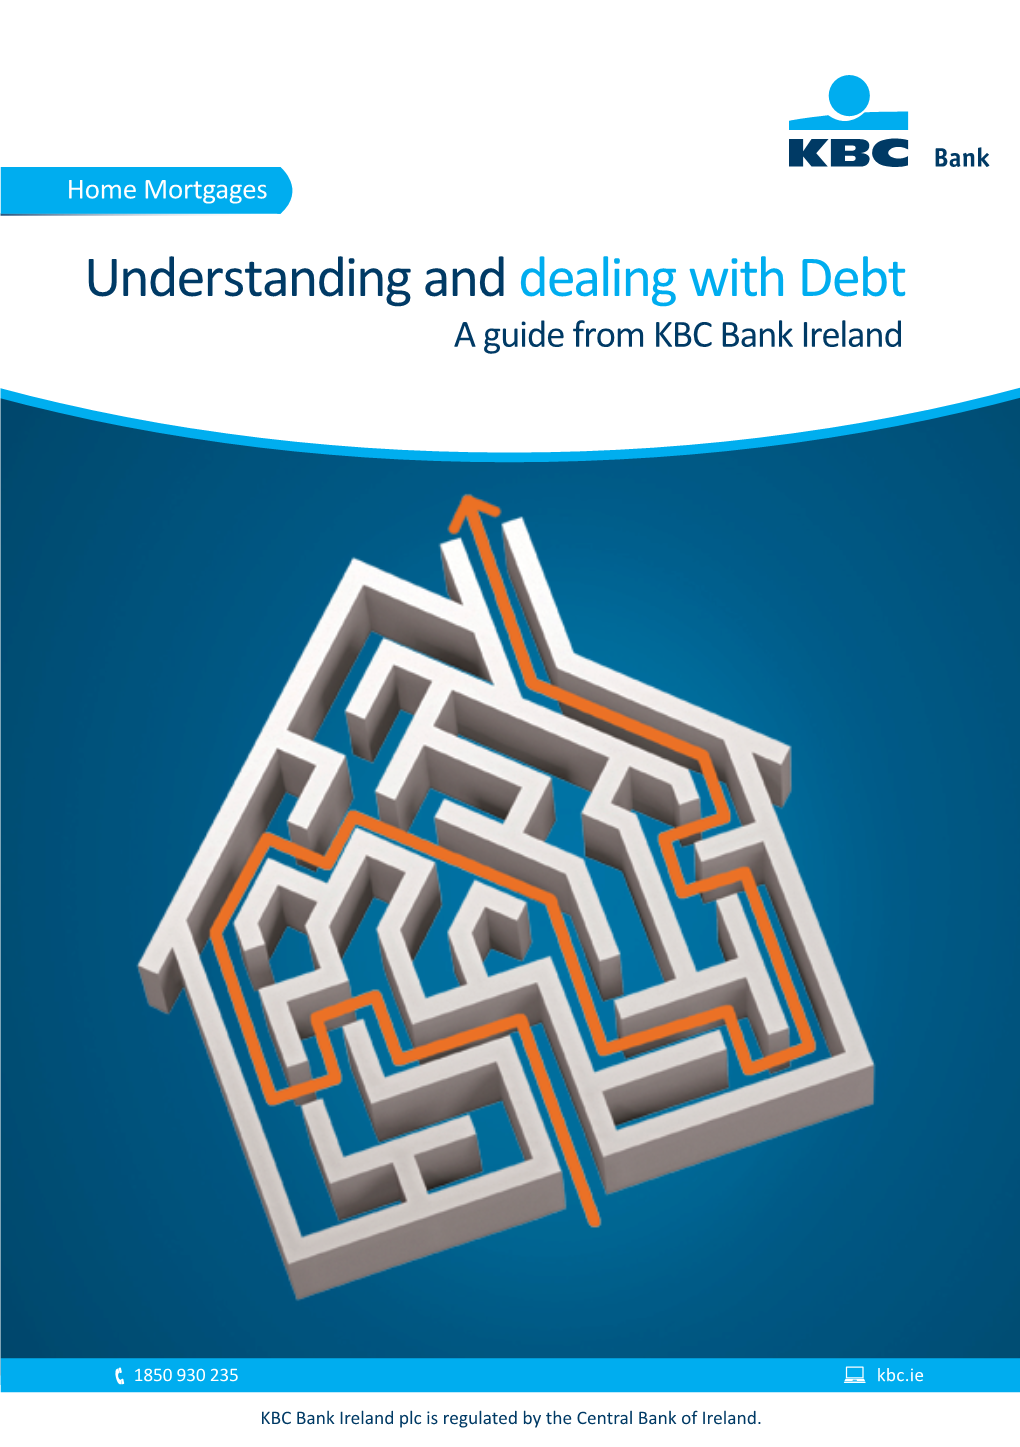 Understanding and Dealing with Debt a Guide from KBC Bank Ireland